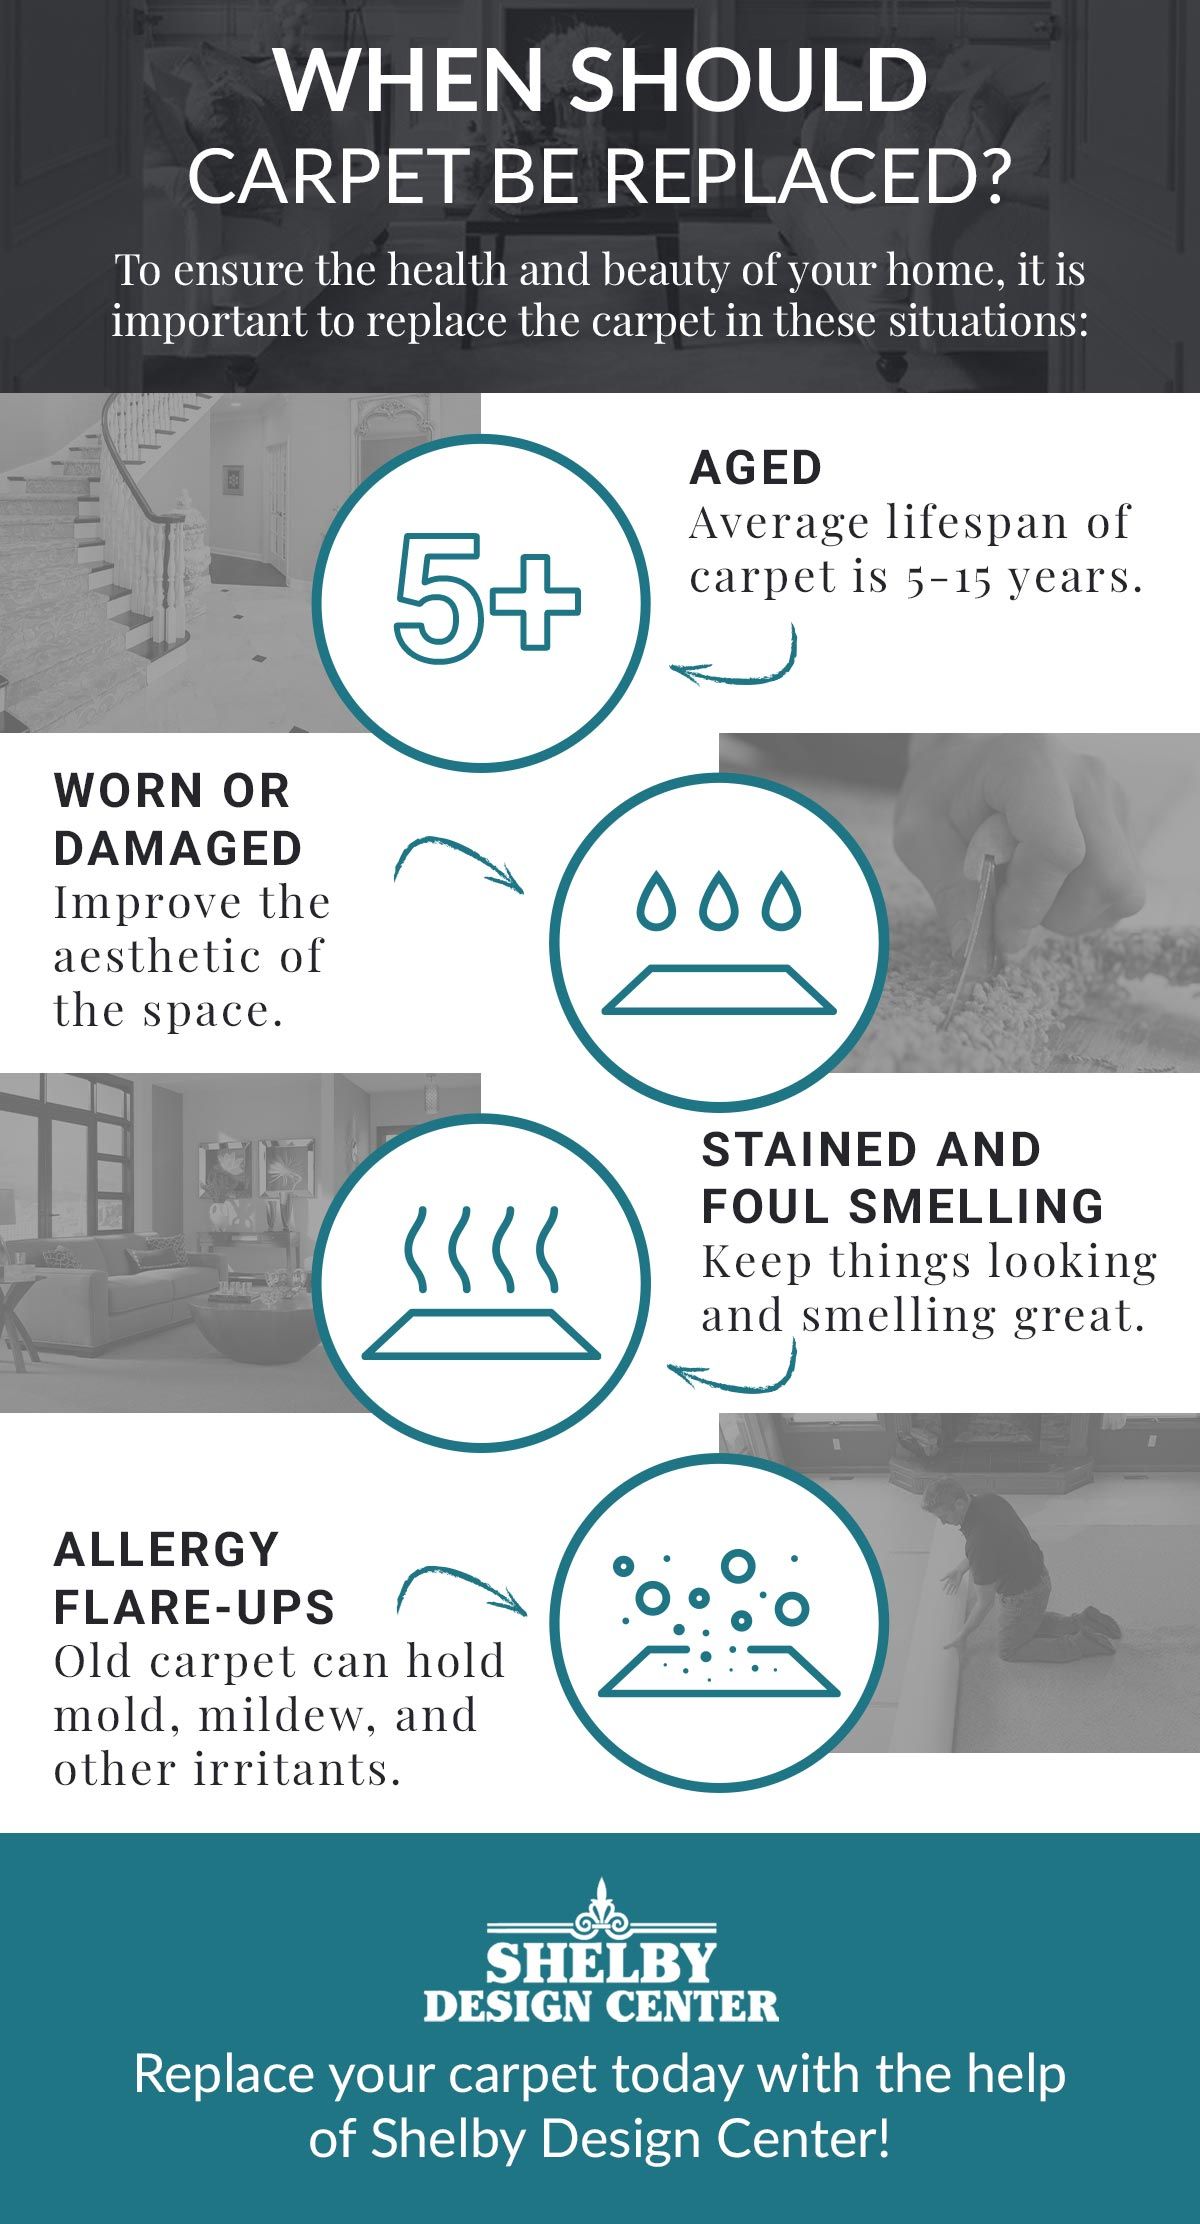 When-Should-Carpet-Be-Replaced-Infographic-61f9b16623039.jpg